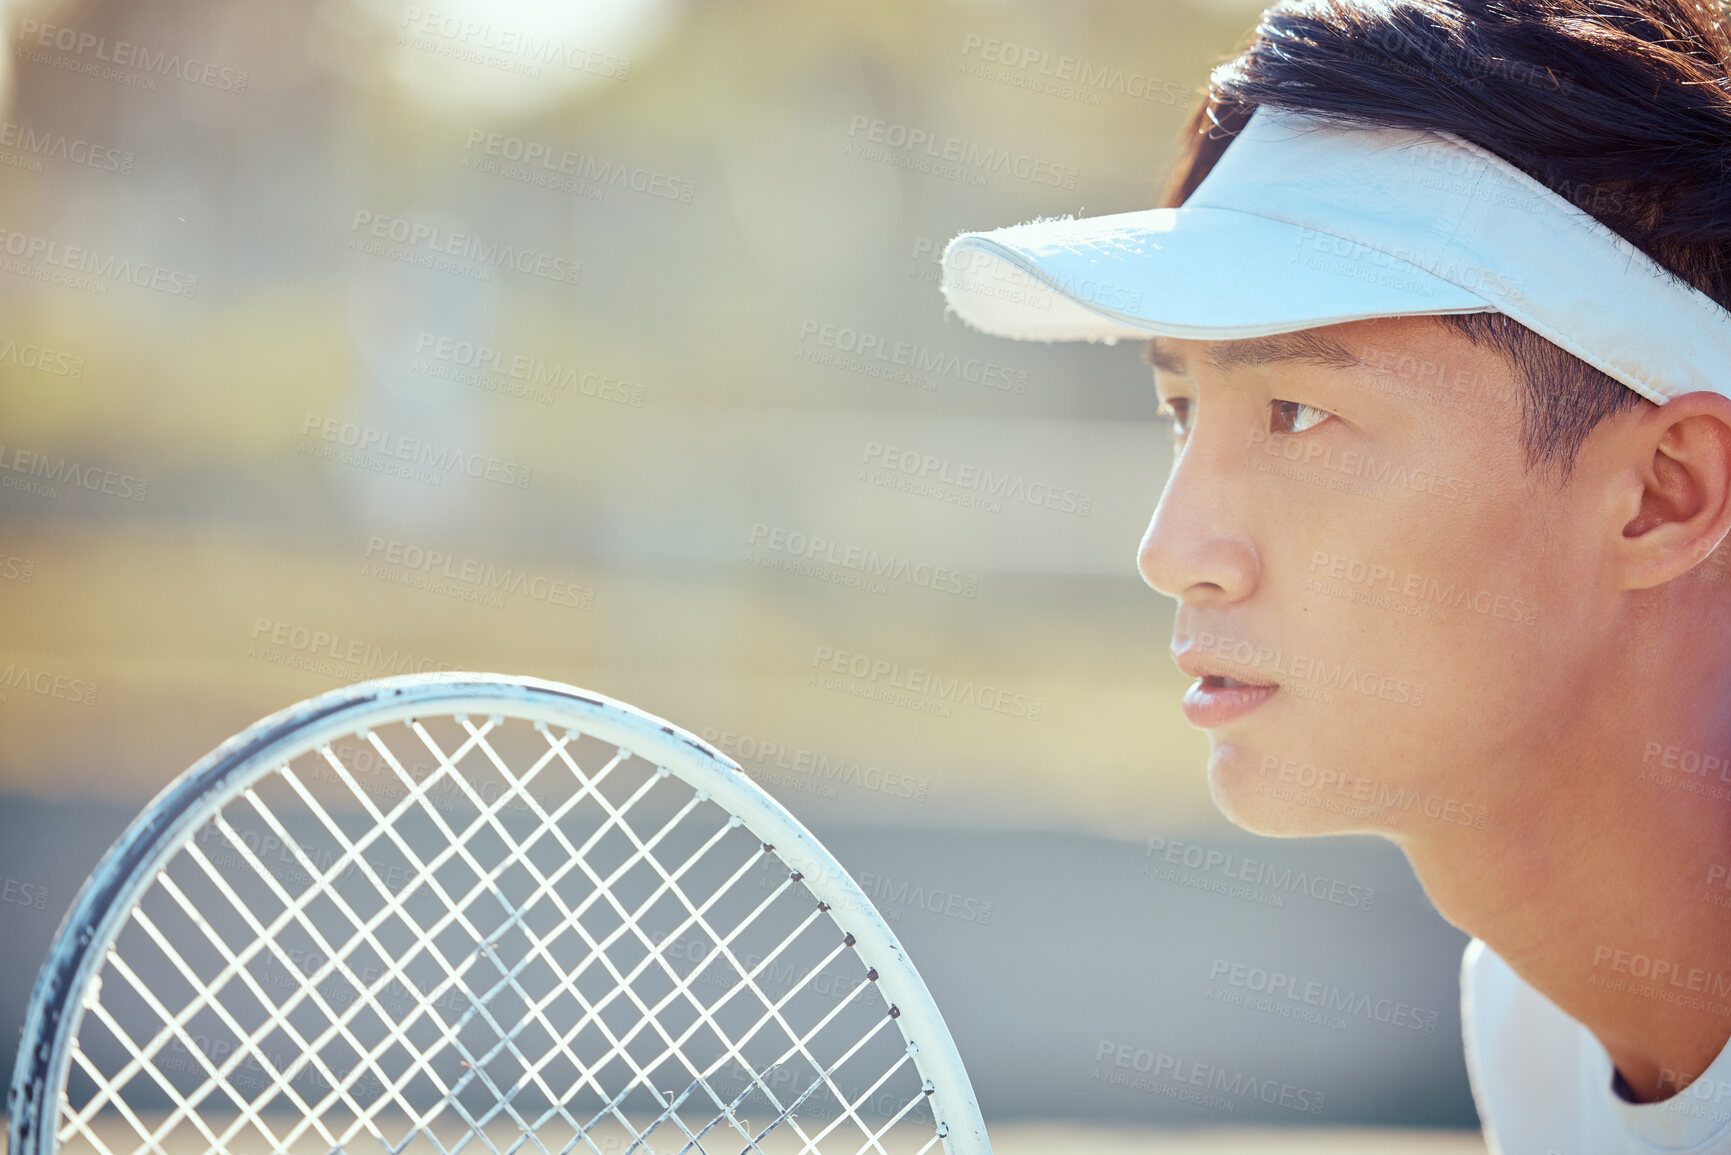 Buy stock photo Tennis, sports and exercise focus of a Asian man athlete in a sport, training or fitness game. Player from Japan with a competitive mindset feeling healthy, strong and ready to start a workout match